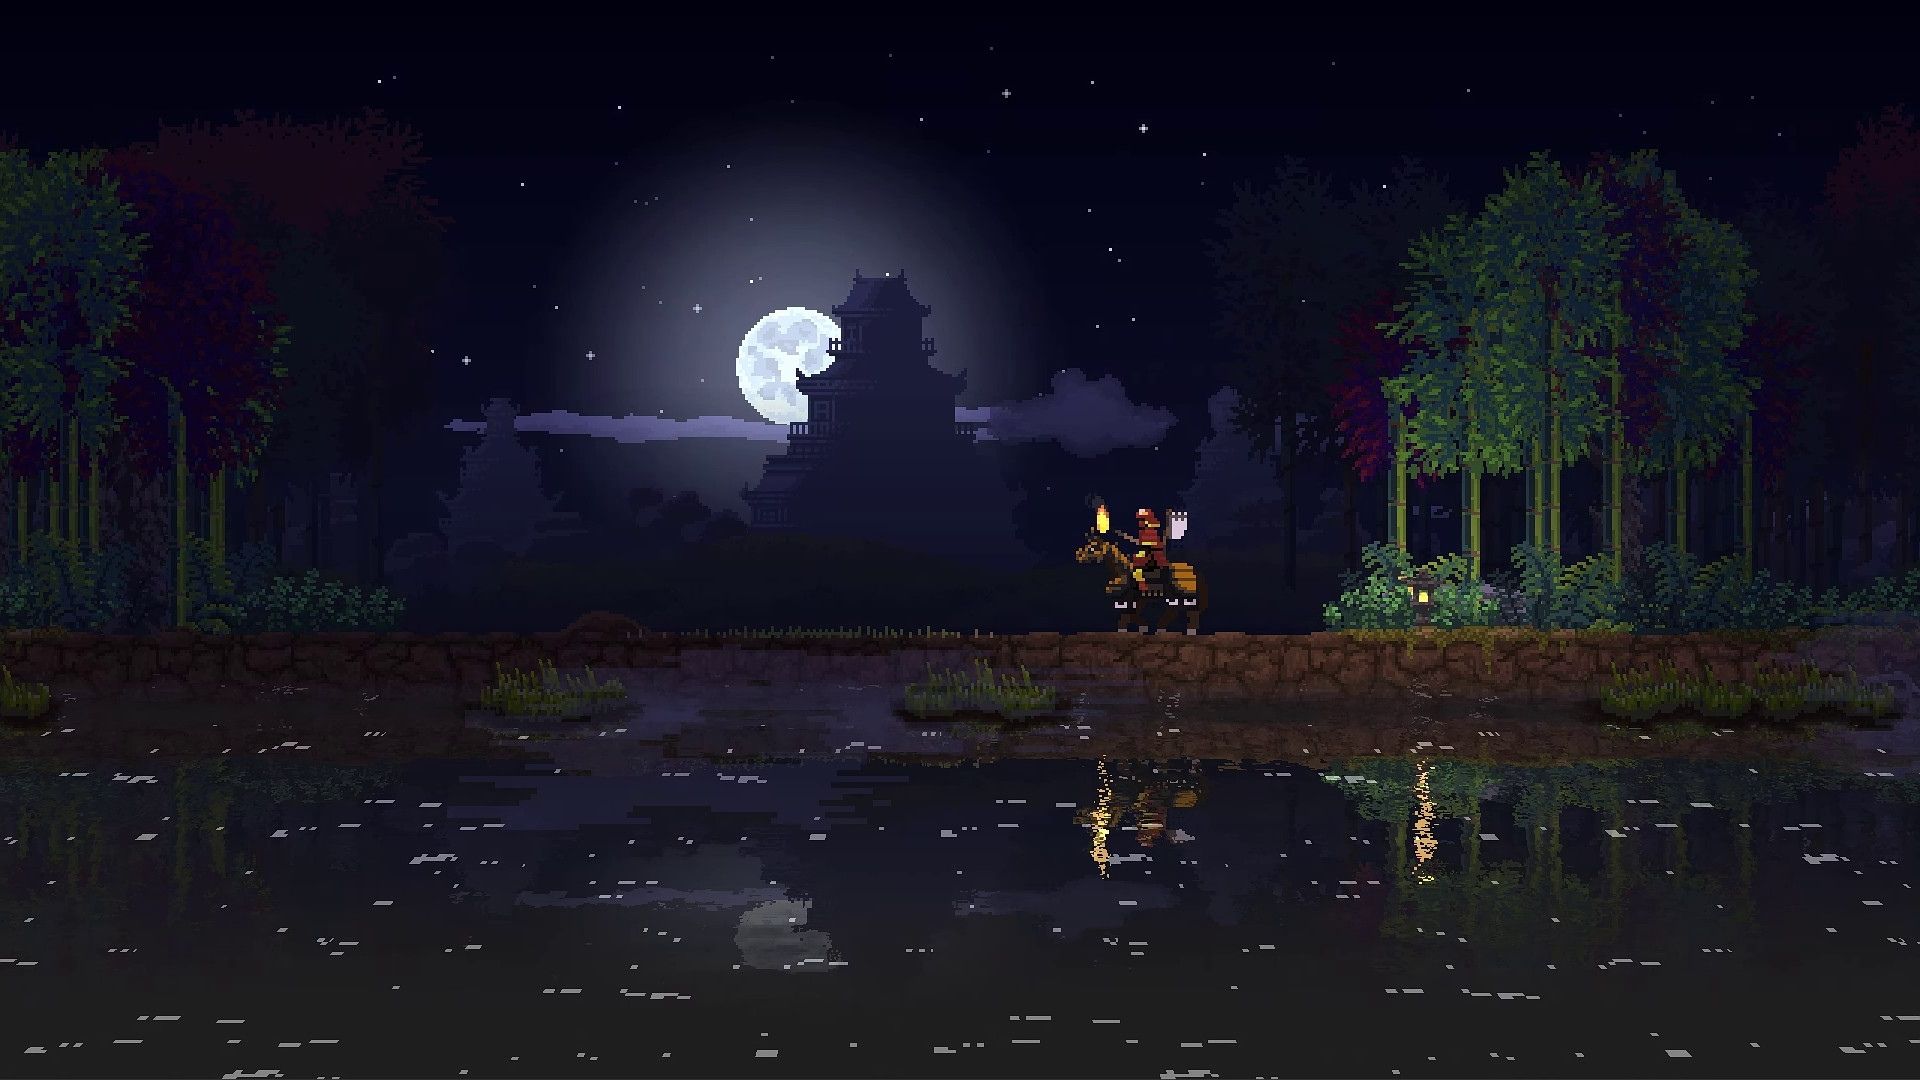 A screenshot from Kingdom Two Crowns, showing a person on a horse, a lake, and the moon.